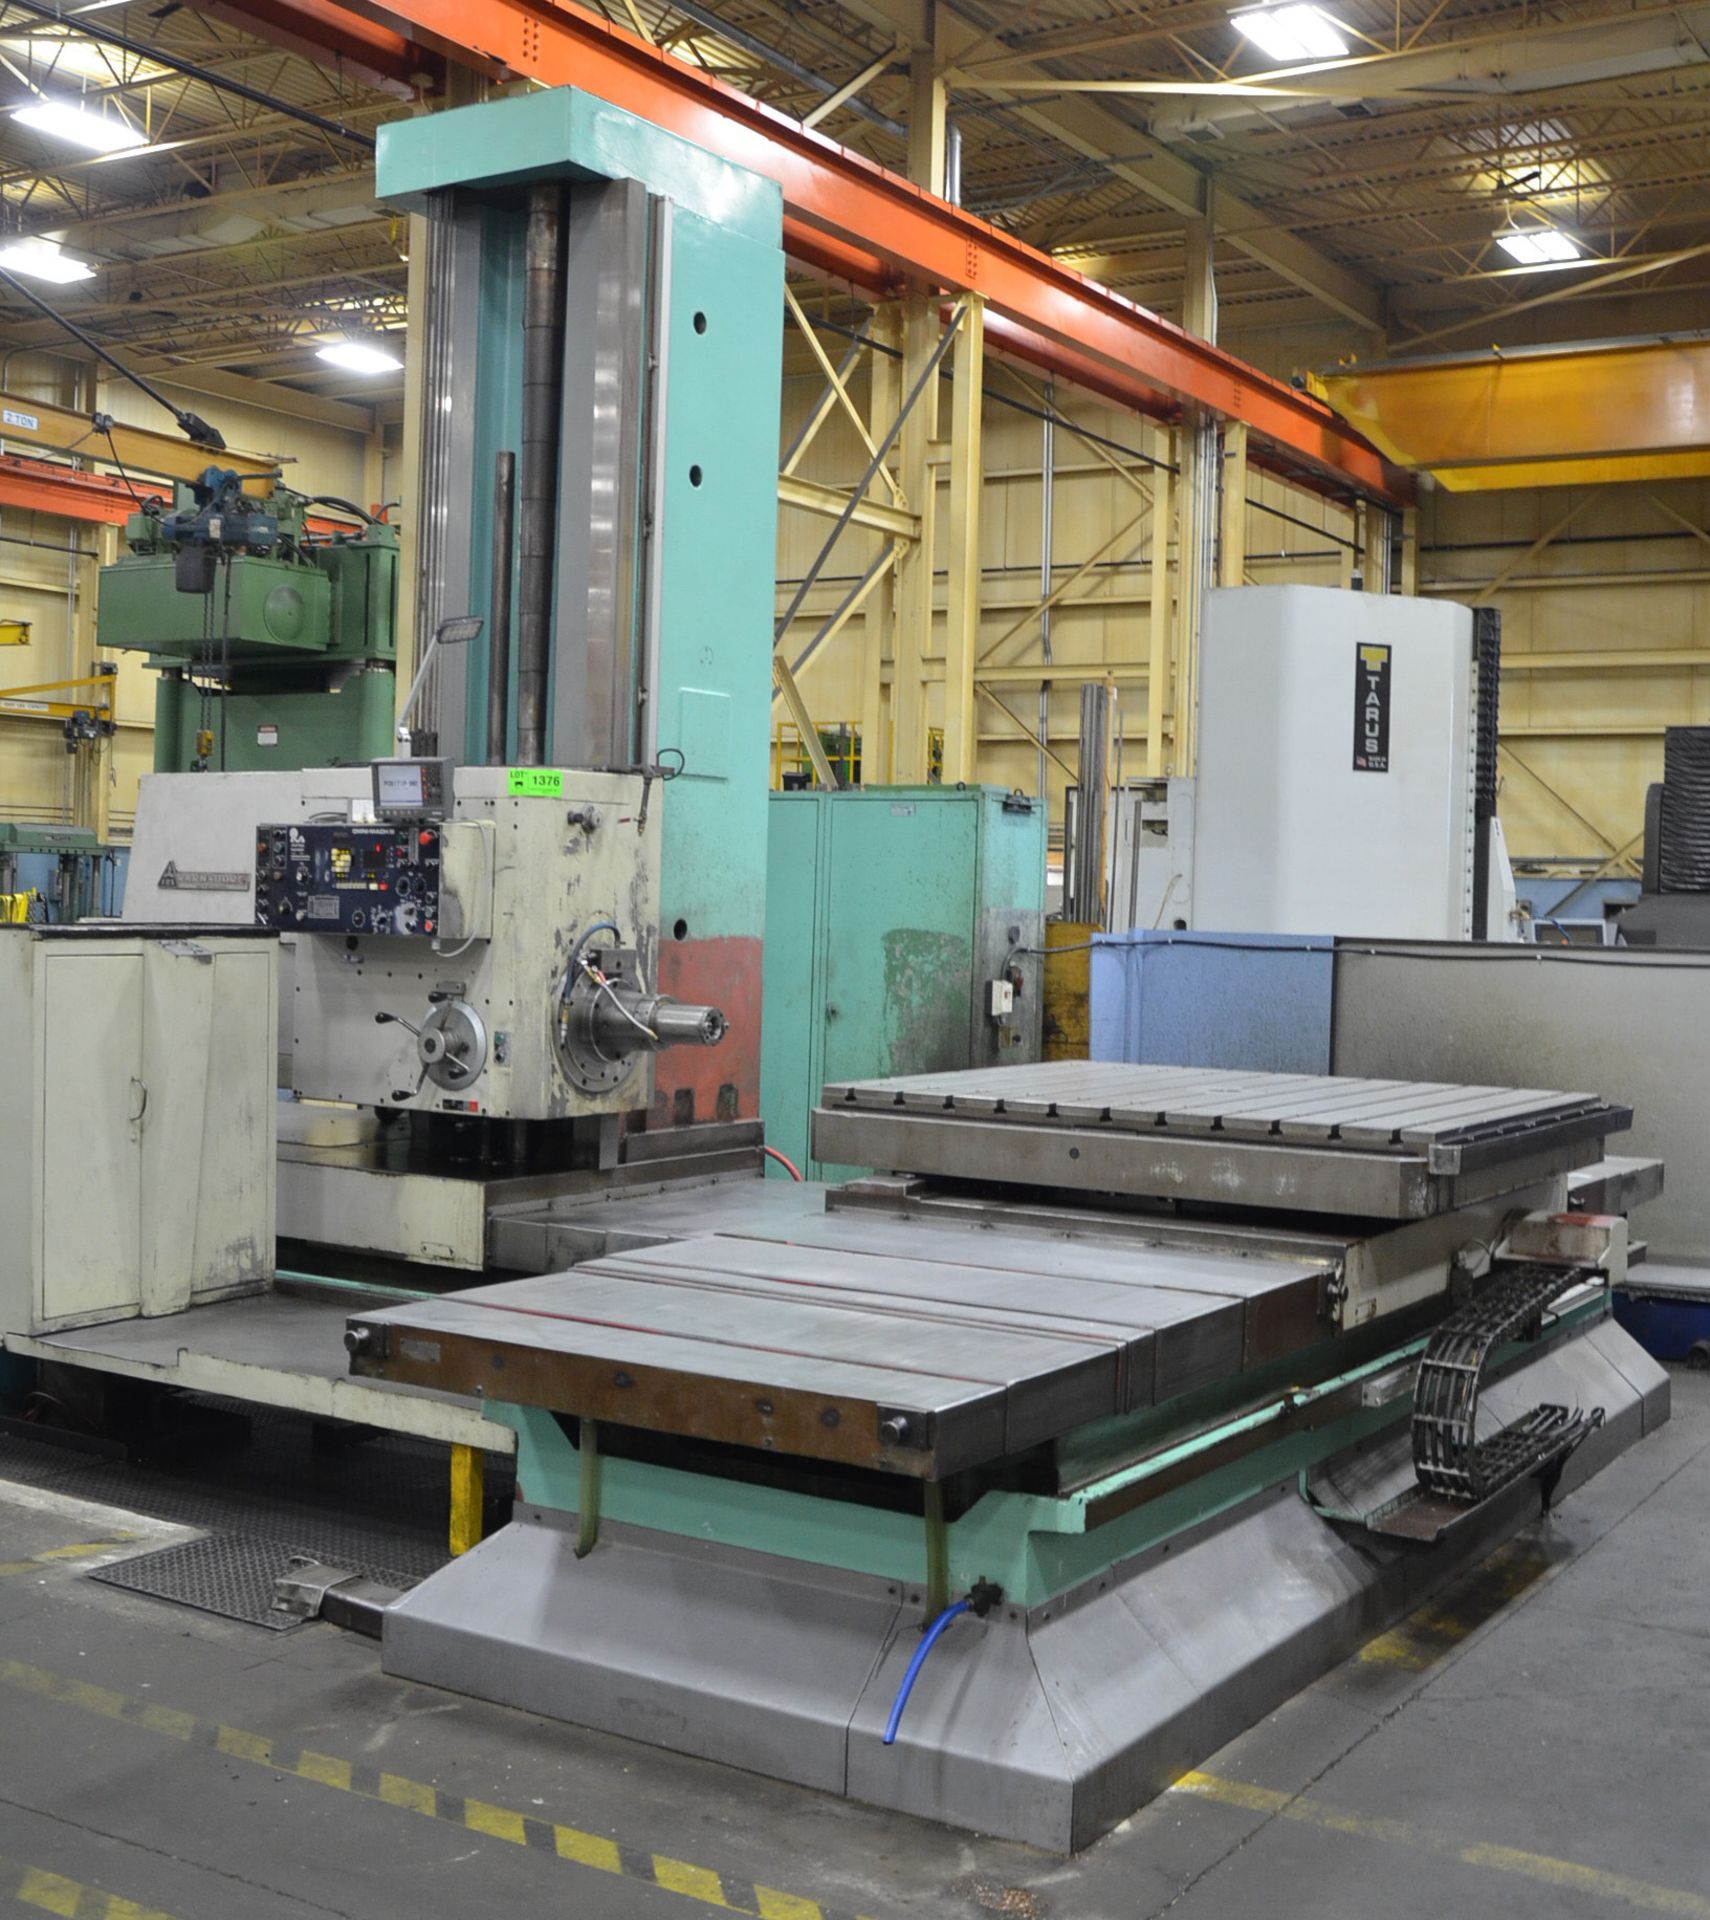 TOS WHN-13-4-A TABLE-TYPE HORIZONTAL BORING MILL WITH 5" SPINDLE, 63"X70.5" T-SLOT ROTARY TABLE,